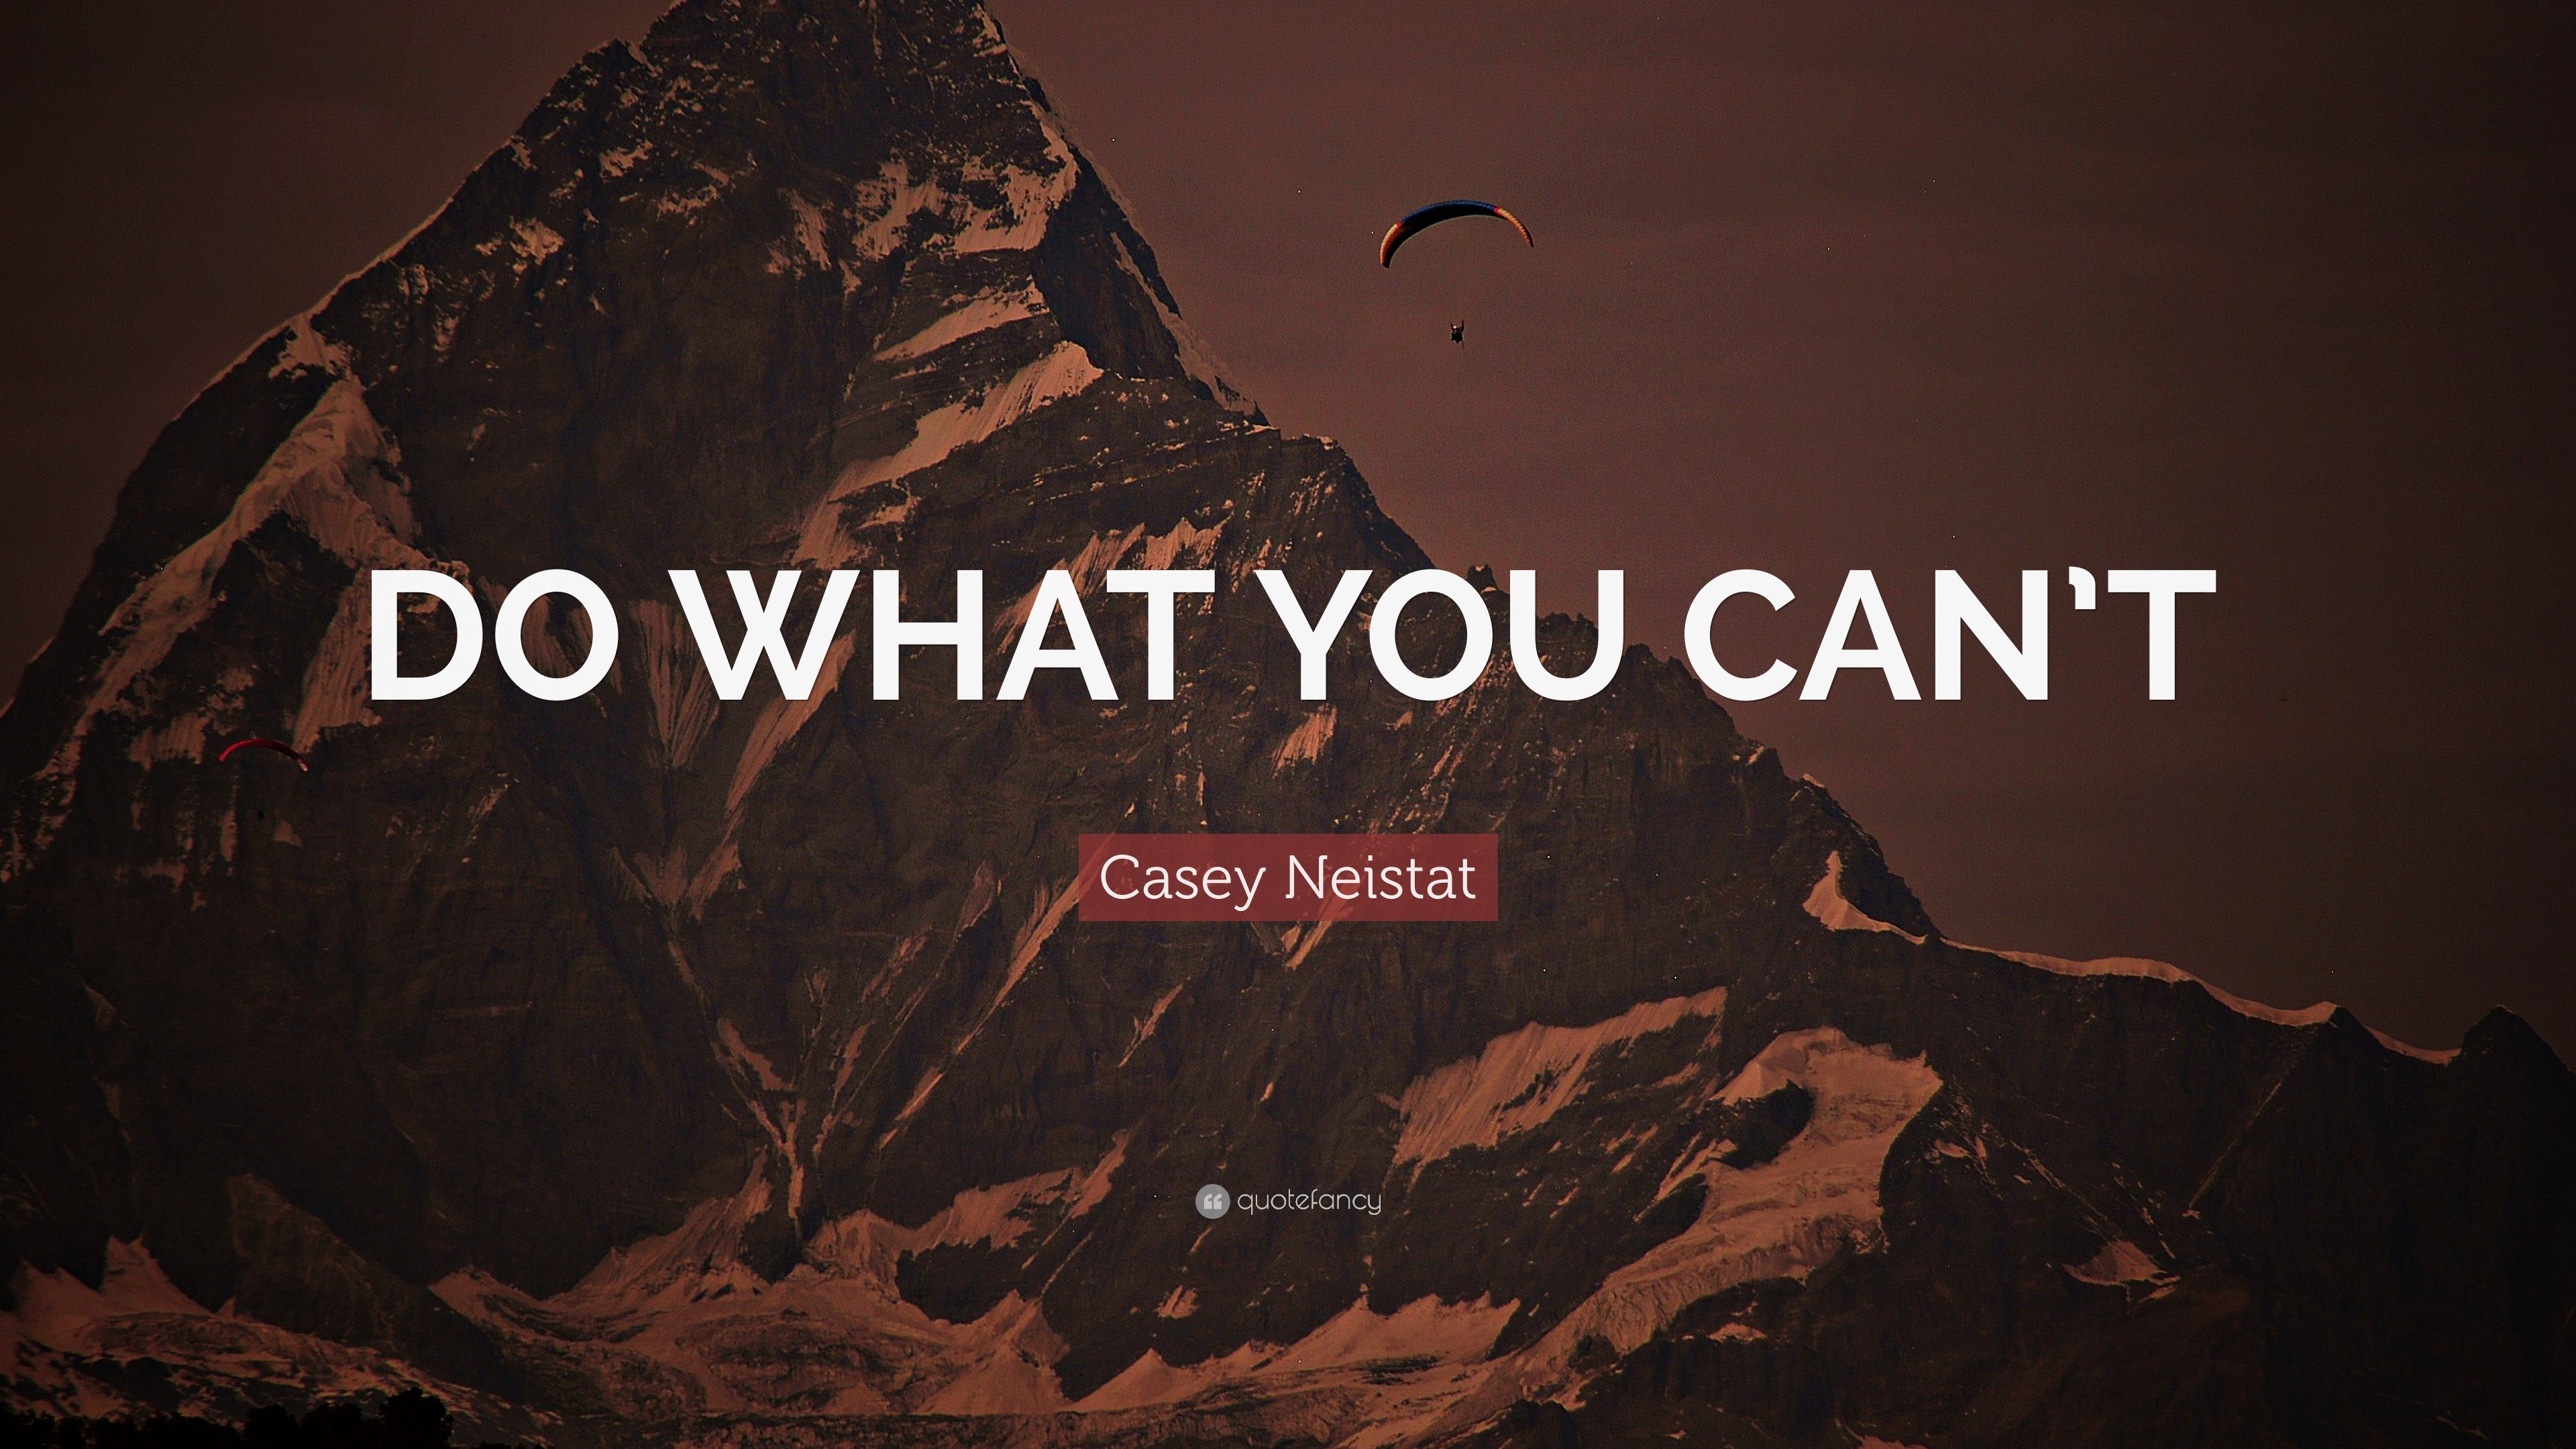 Casey Neistat Quote: "DO WHAT YOU CAN’T" .